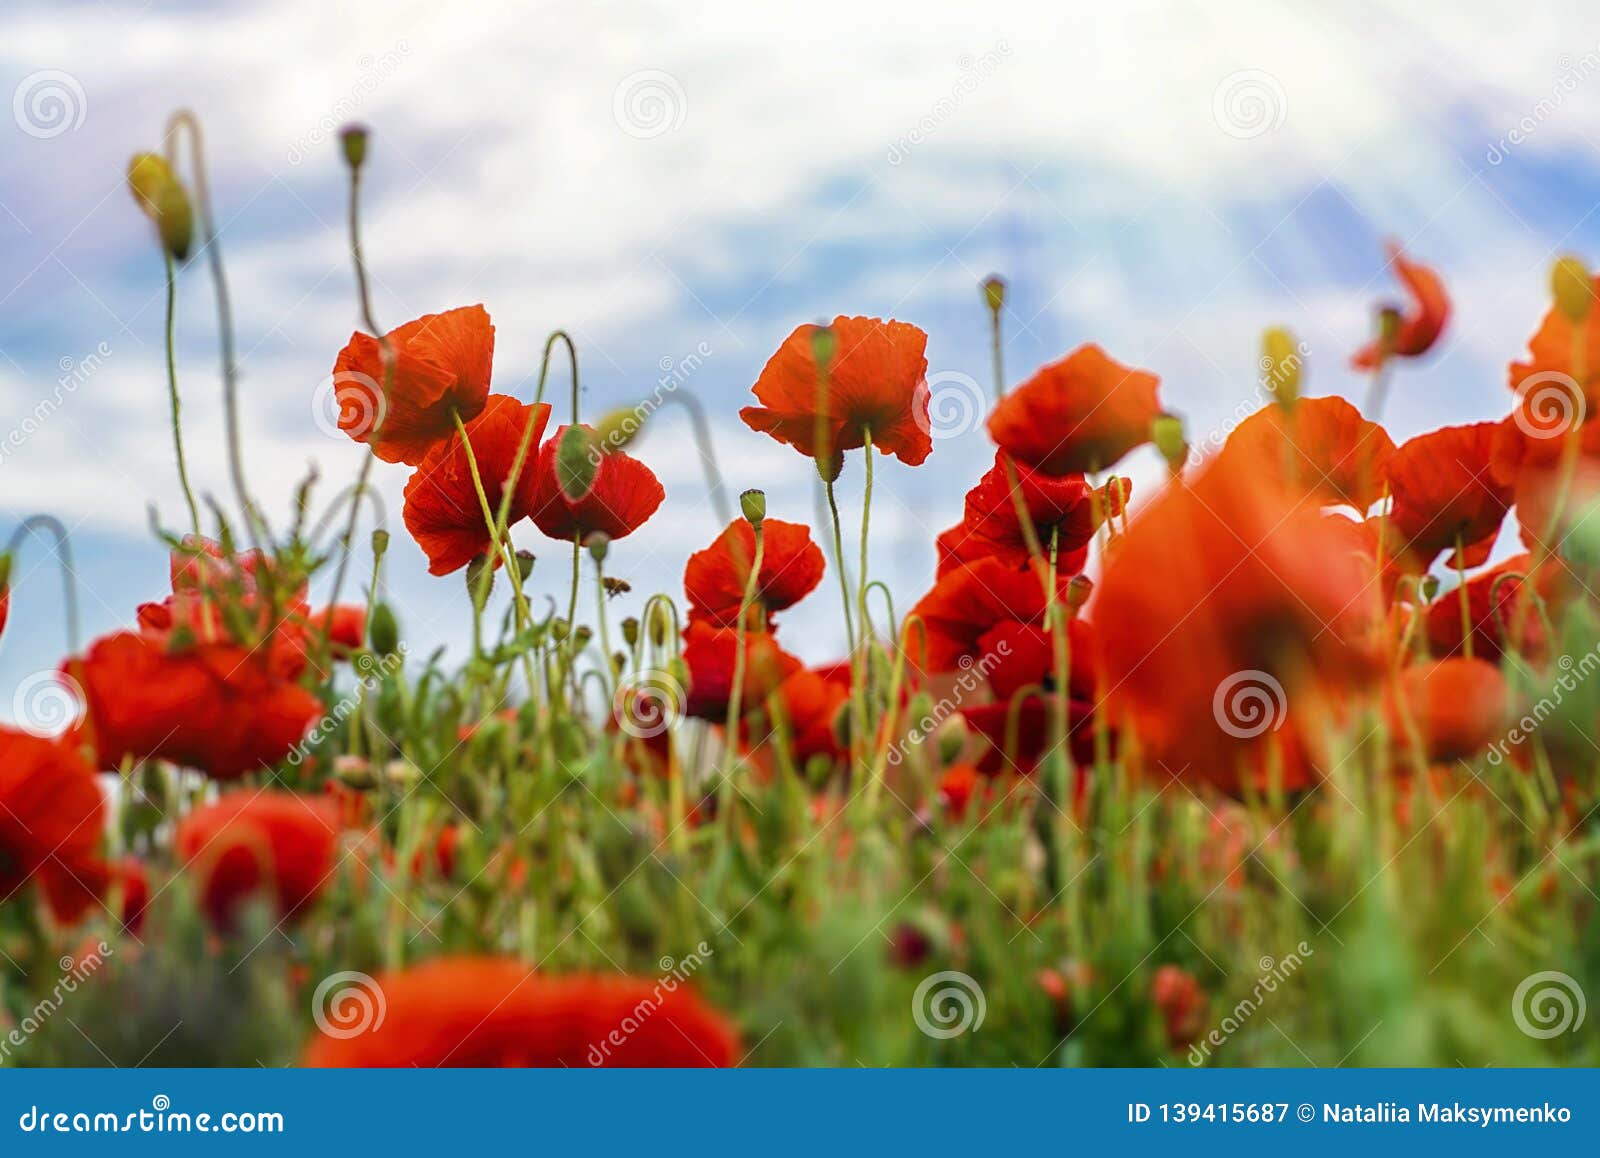 Red Poppies on the Field on a Sunny  Springtime of Wallpaper.  Ecology Concept. Beauty World Stock Image - Image of bright, bloom:  139415687